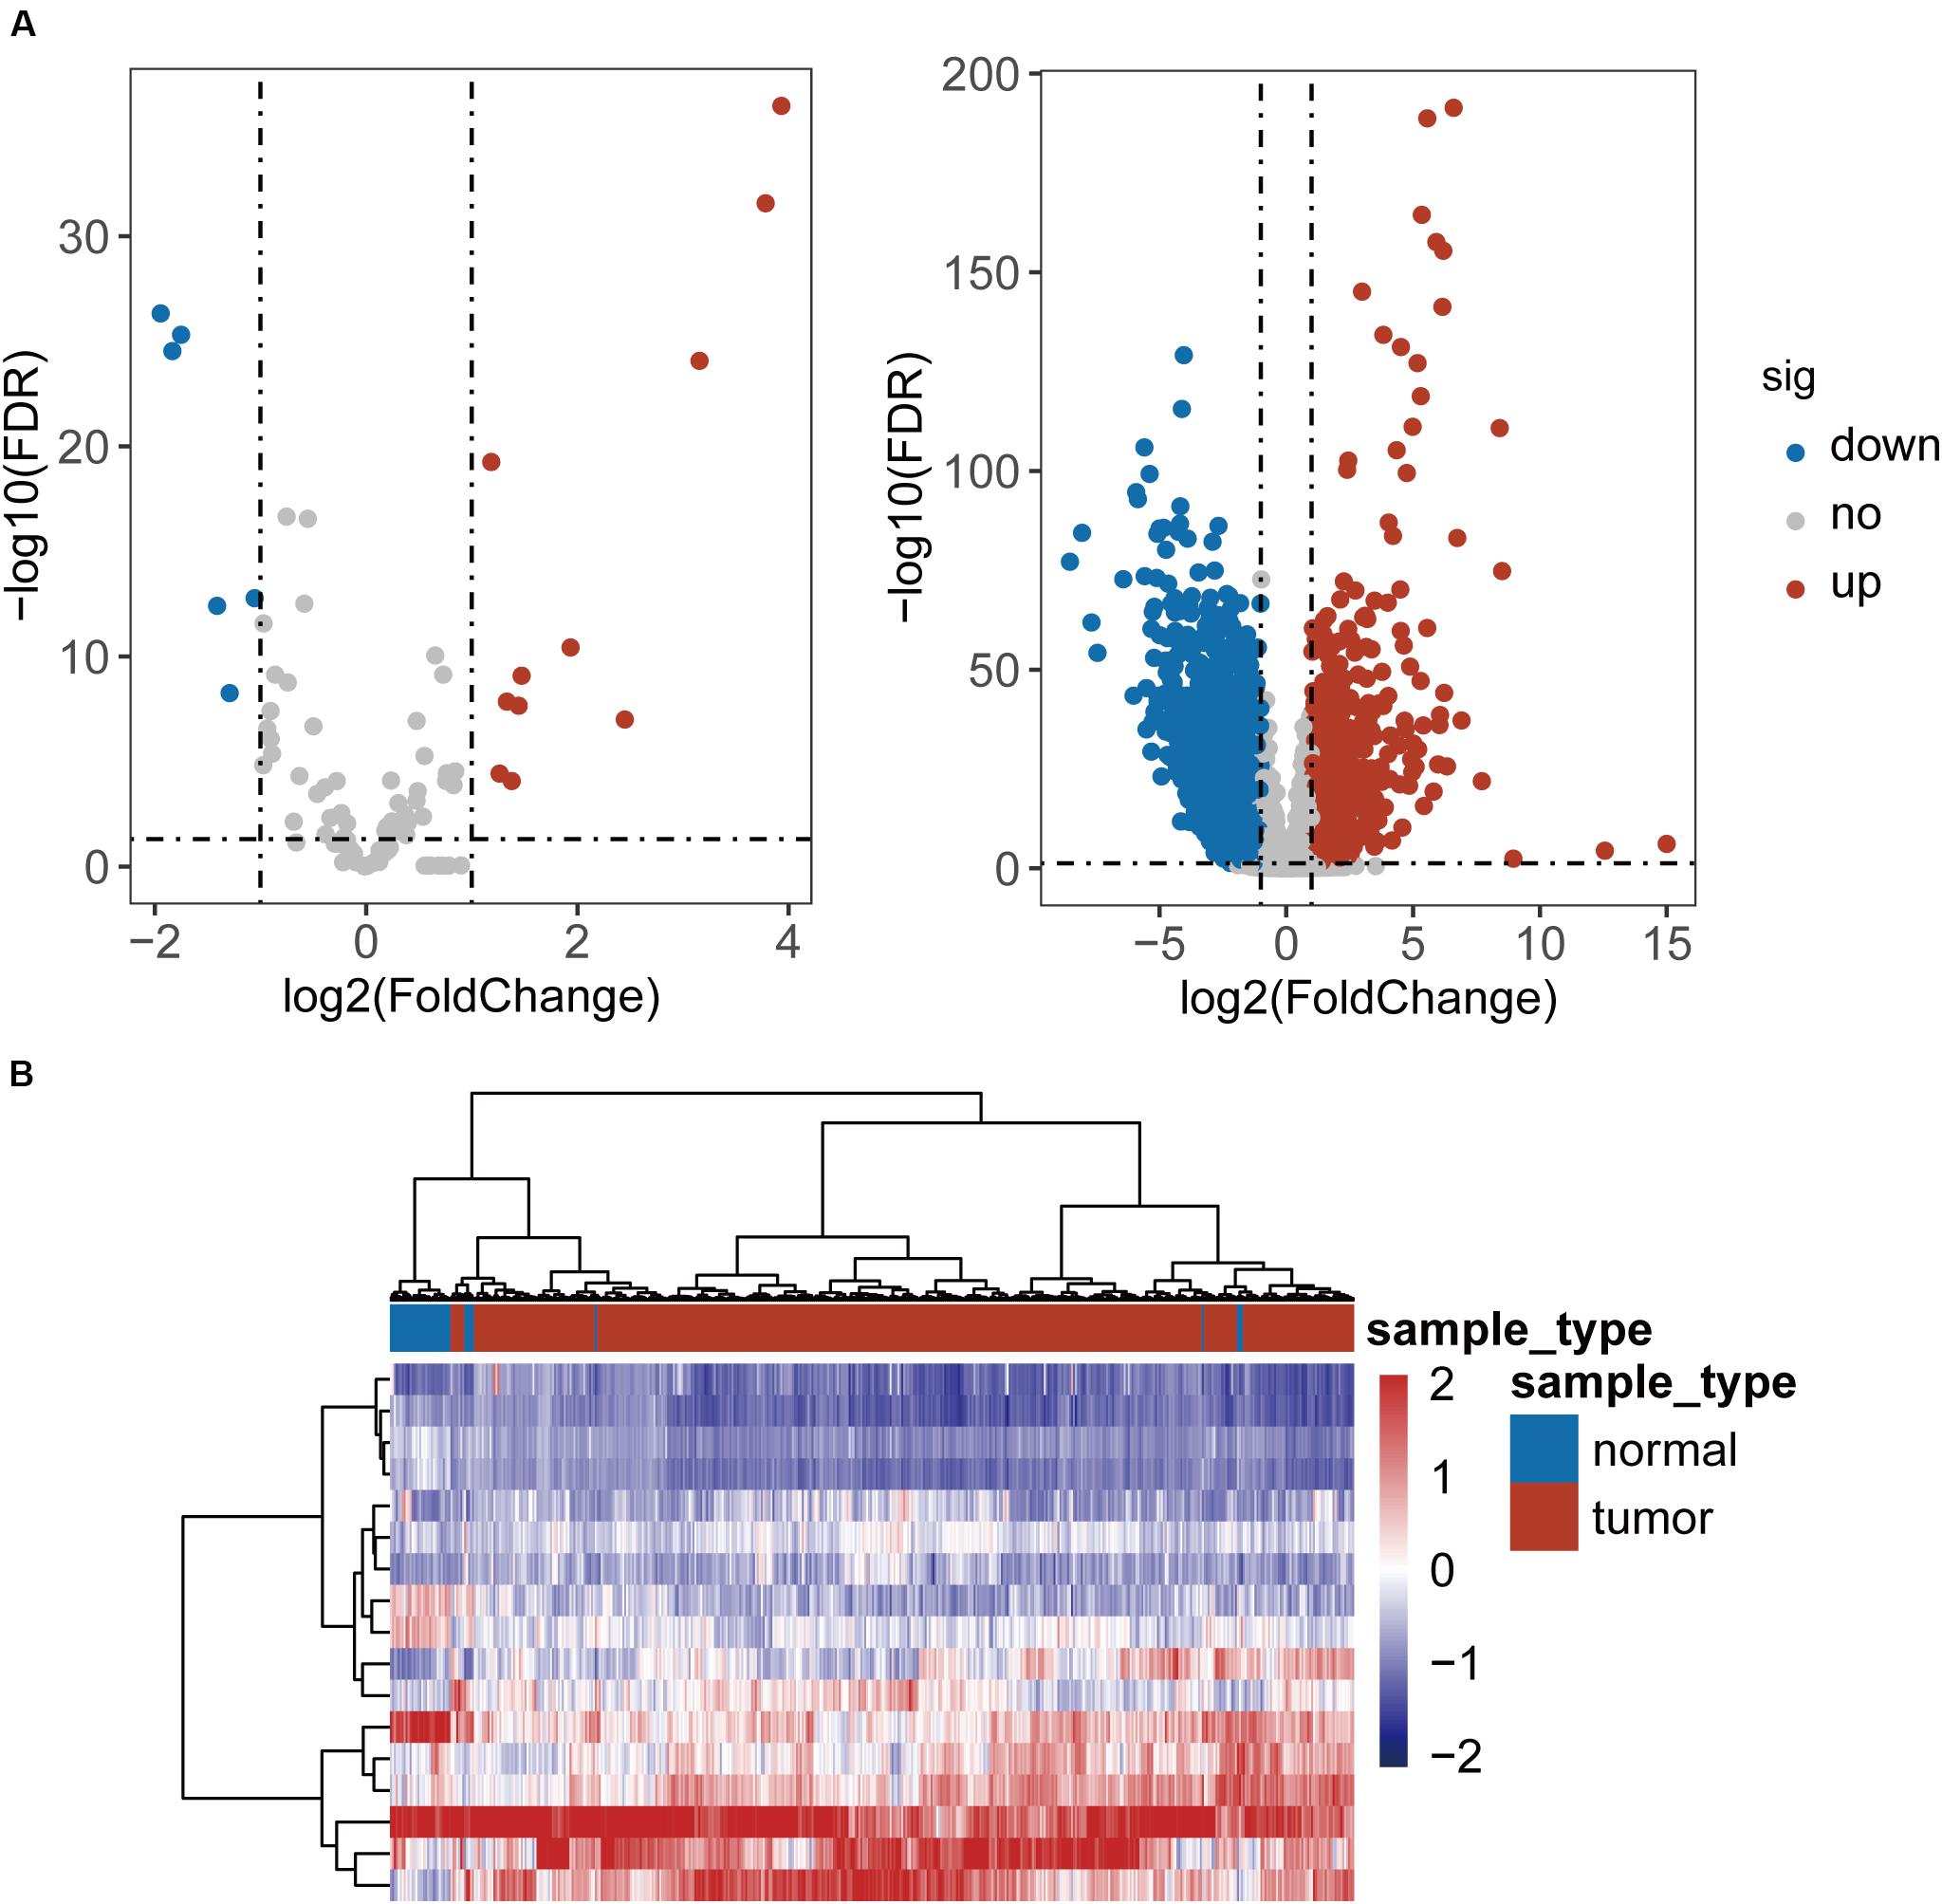 Frontiers | Characterization of lncRNA-Perturbed TLR-Signaling Network  Identifies Novel lncRNA Prognostic Biomarkers in Colorectal Cancer